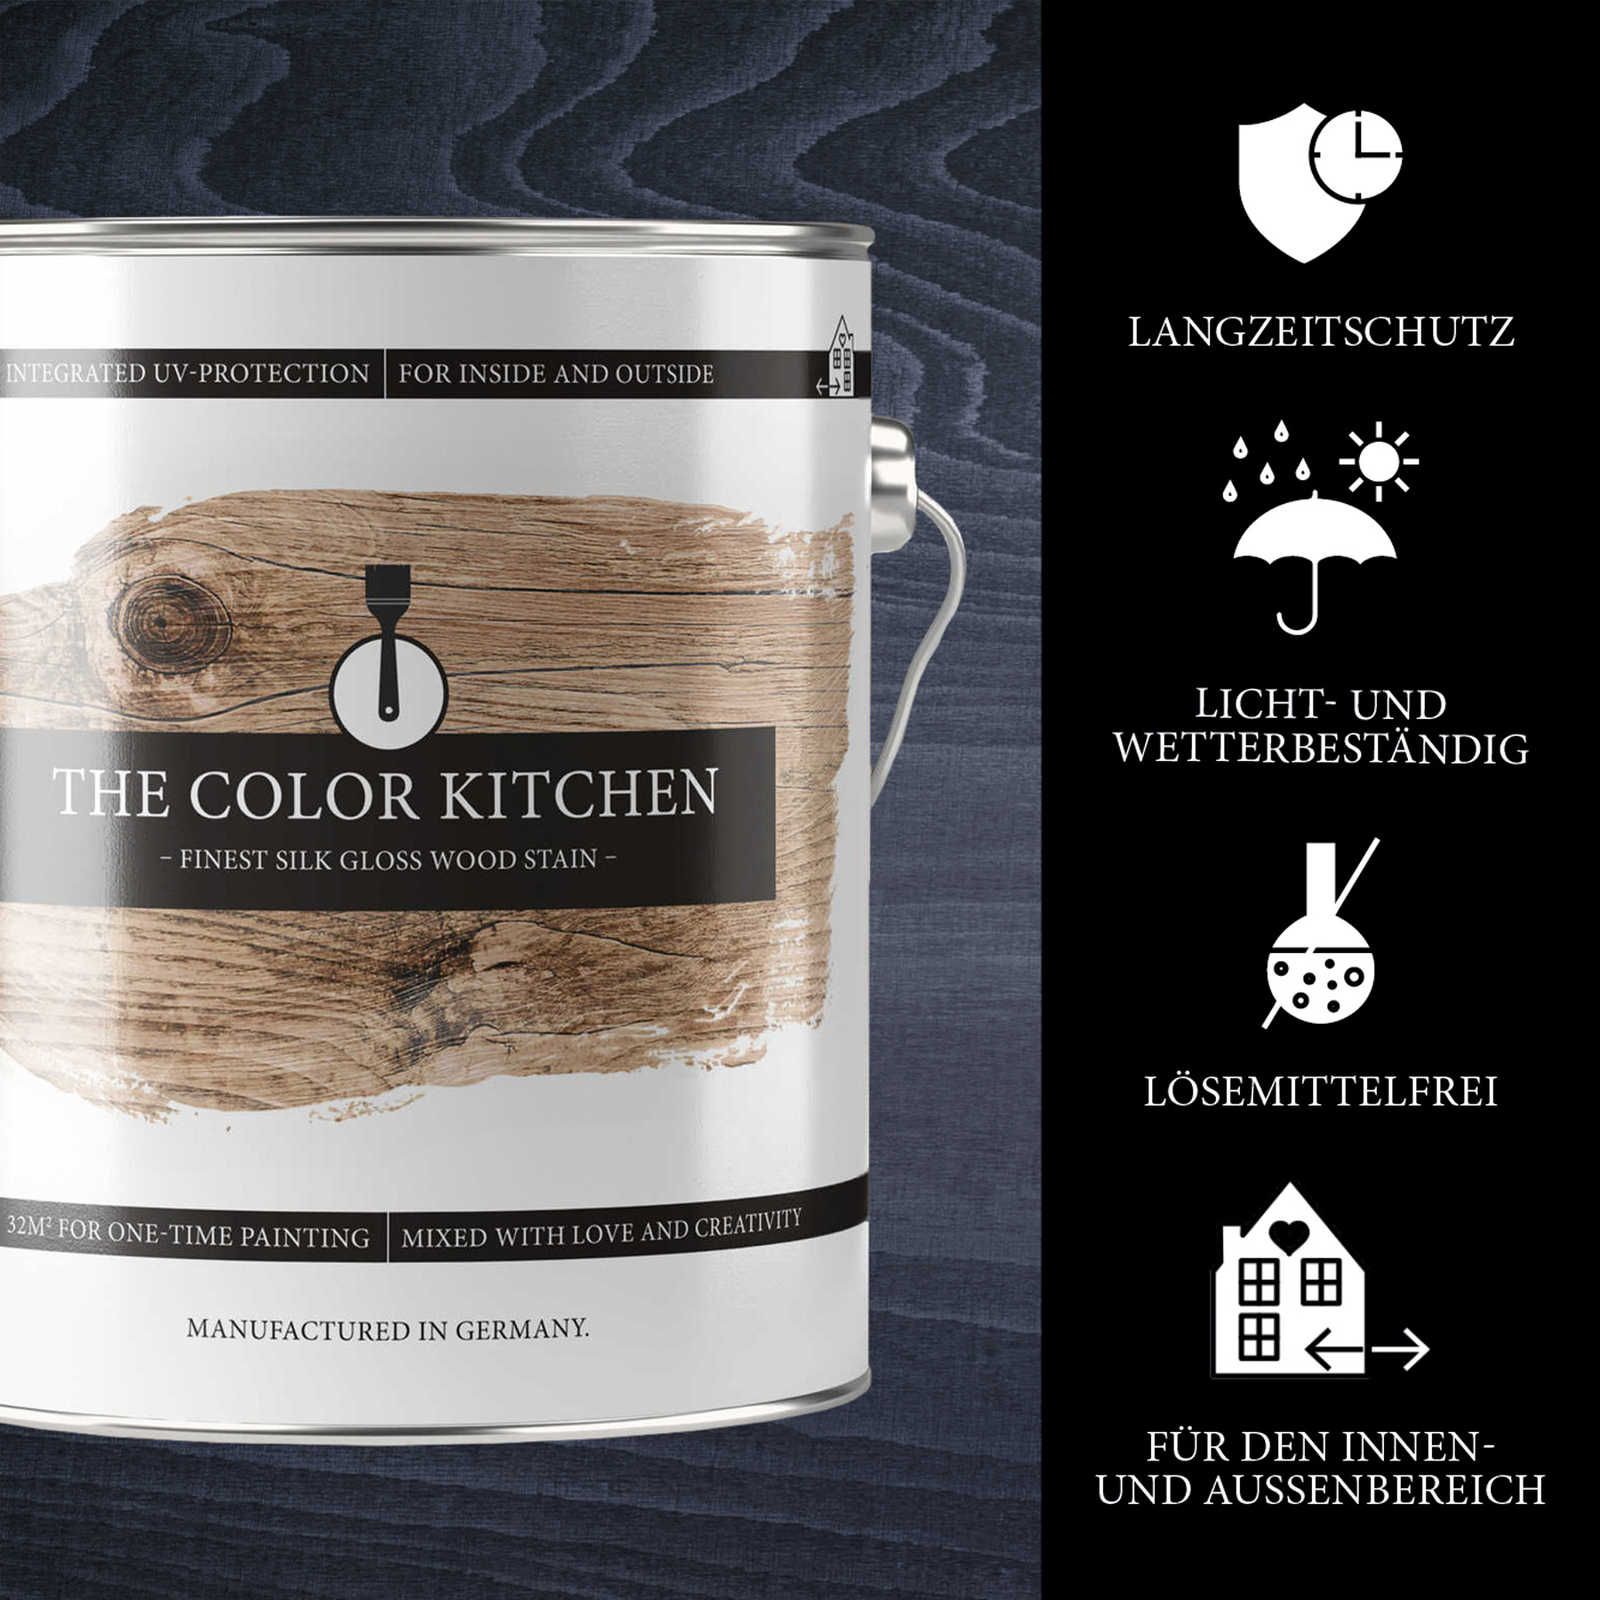             Wood Stain »Anthracite Grey« silk gloss for interior & exterior - 2.5 litres
        